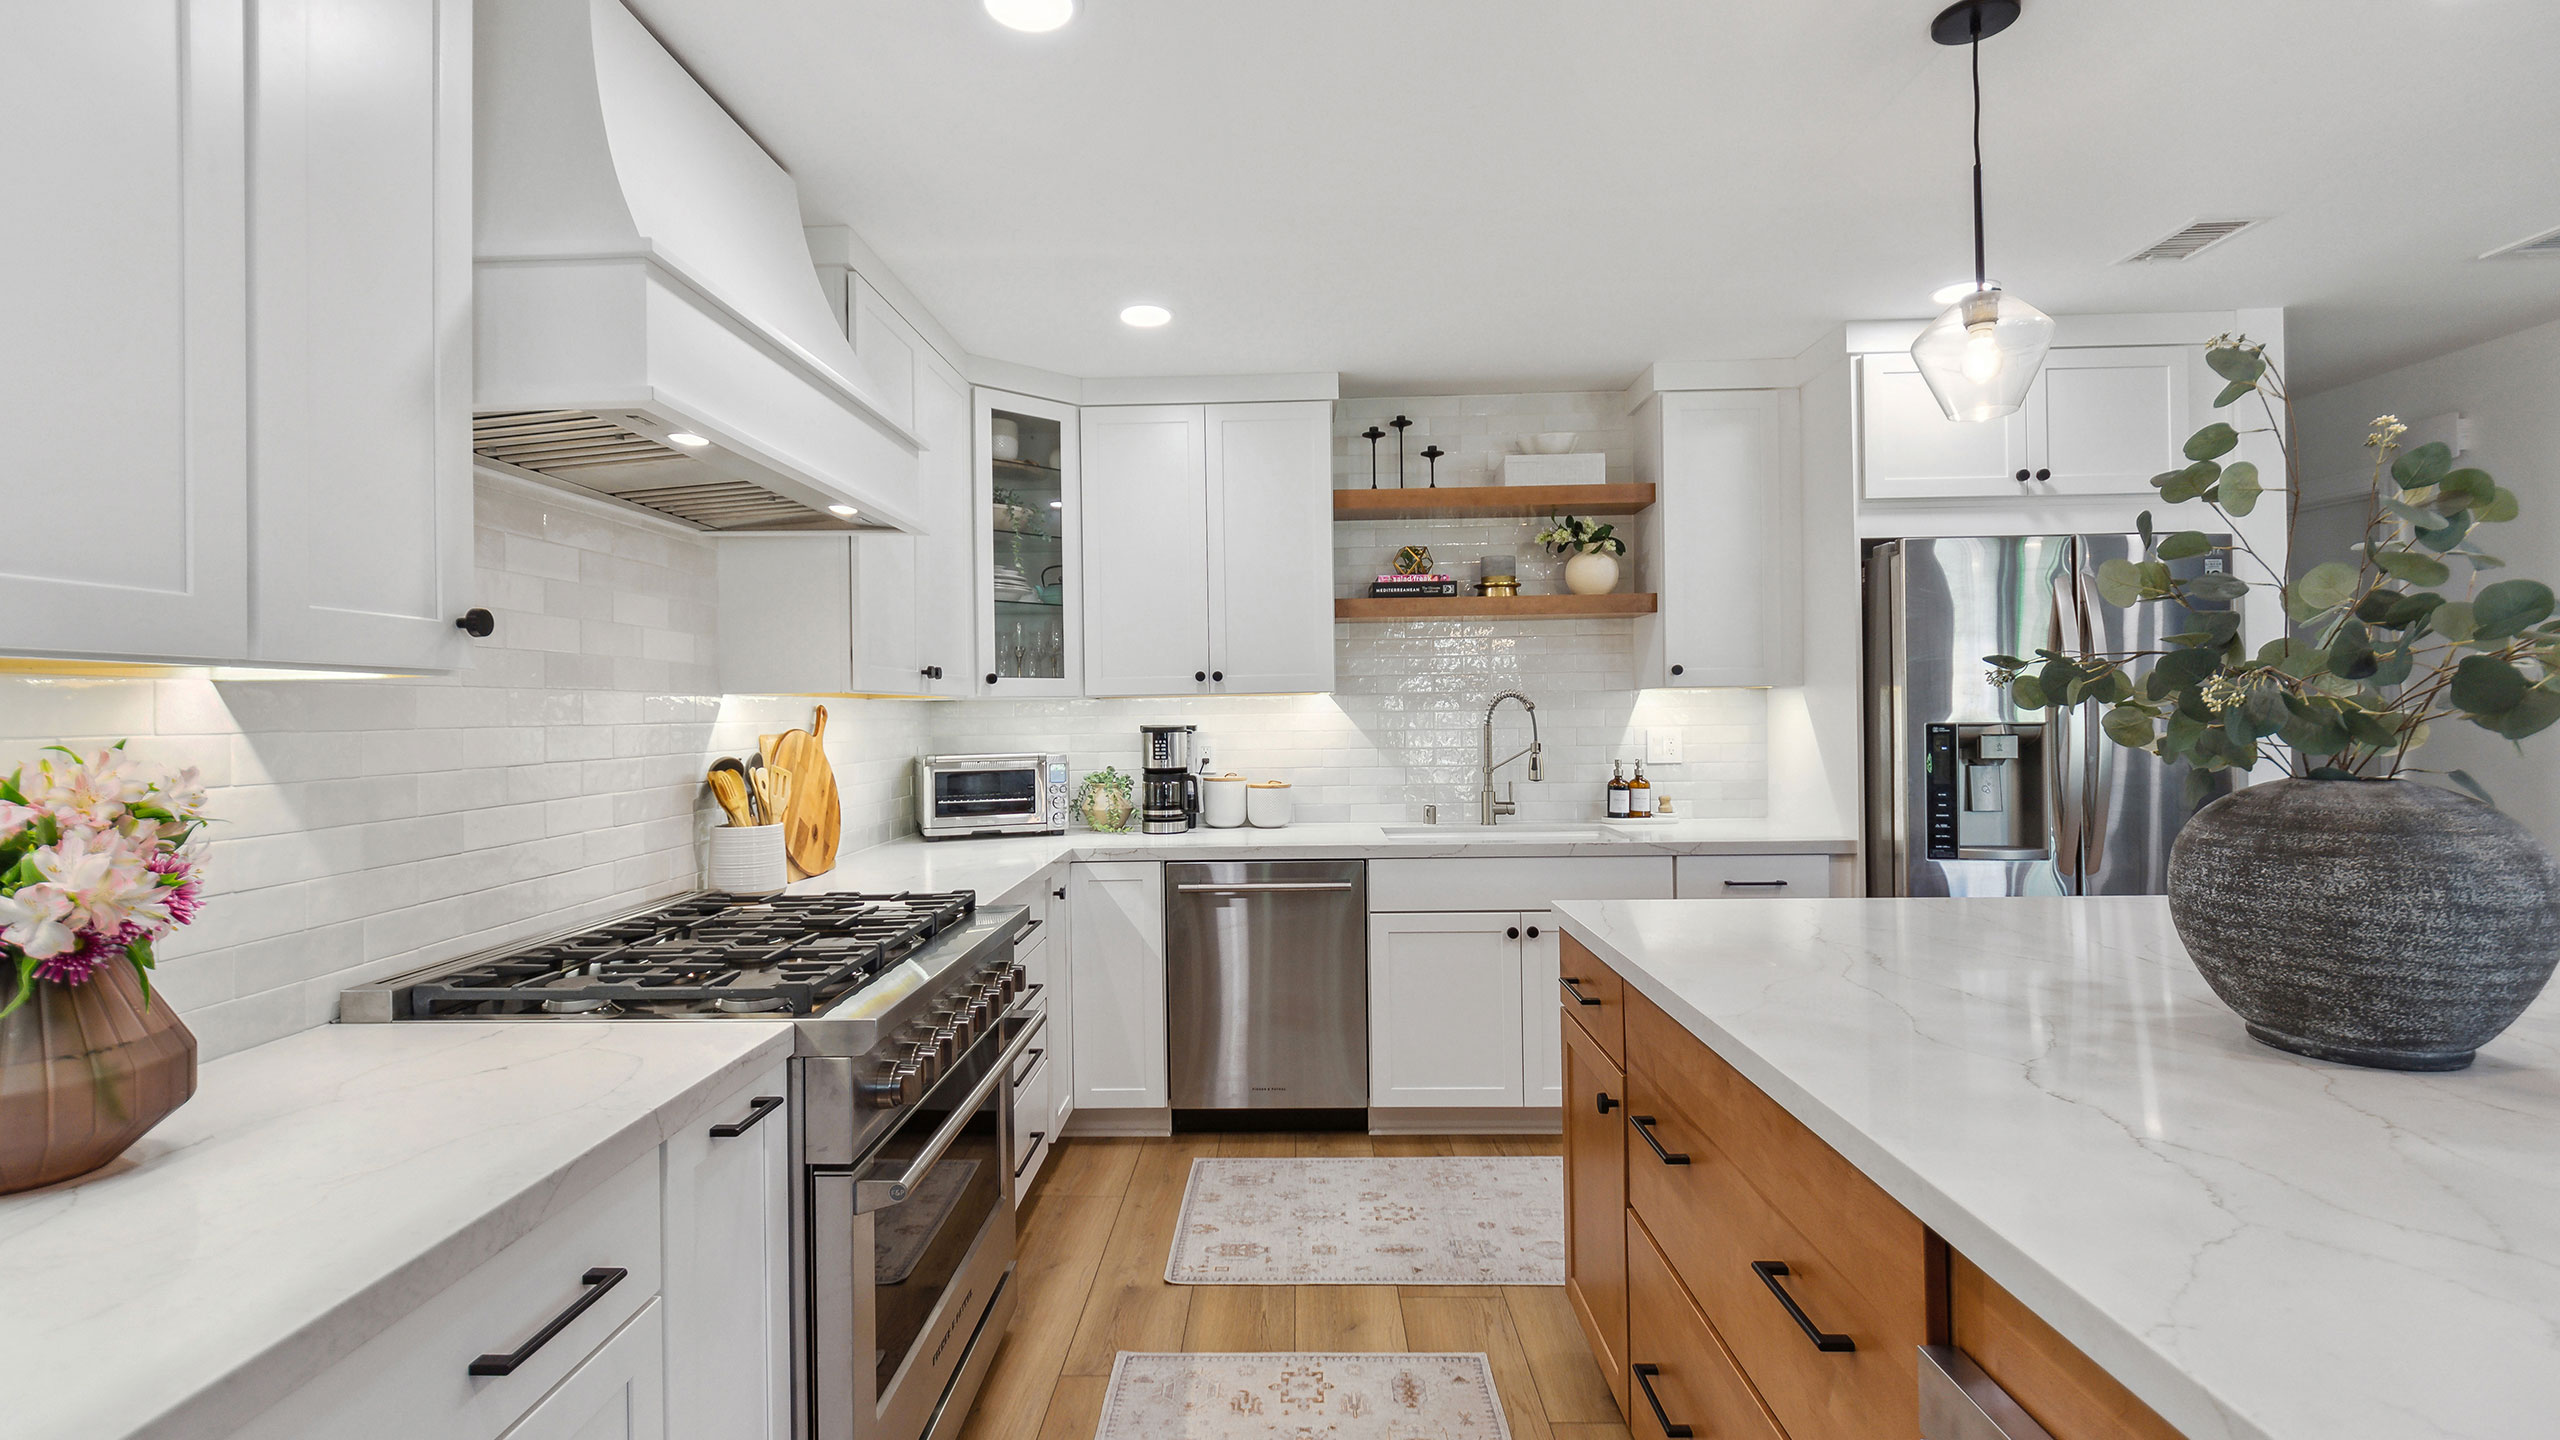 This kitchen features white cabinets and Vadara Ostara Dawn white quartz countertops. The kitchen island has brown wood cabinets and a potted plant above on top of it.